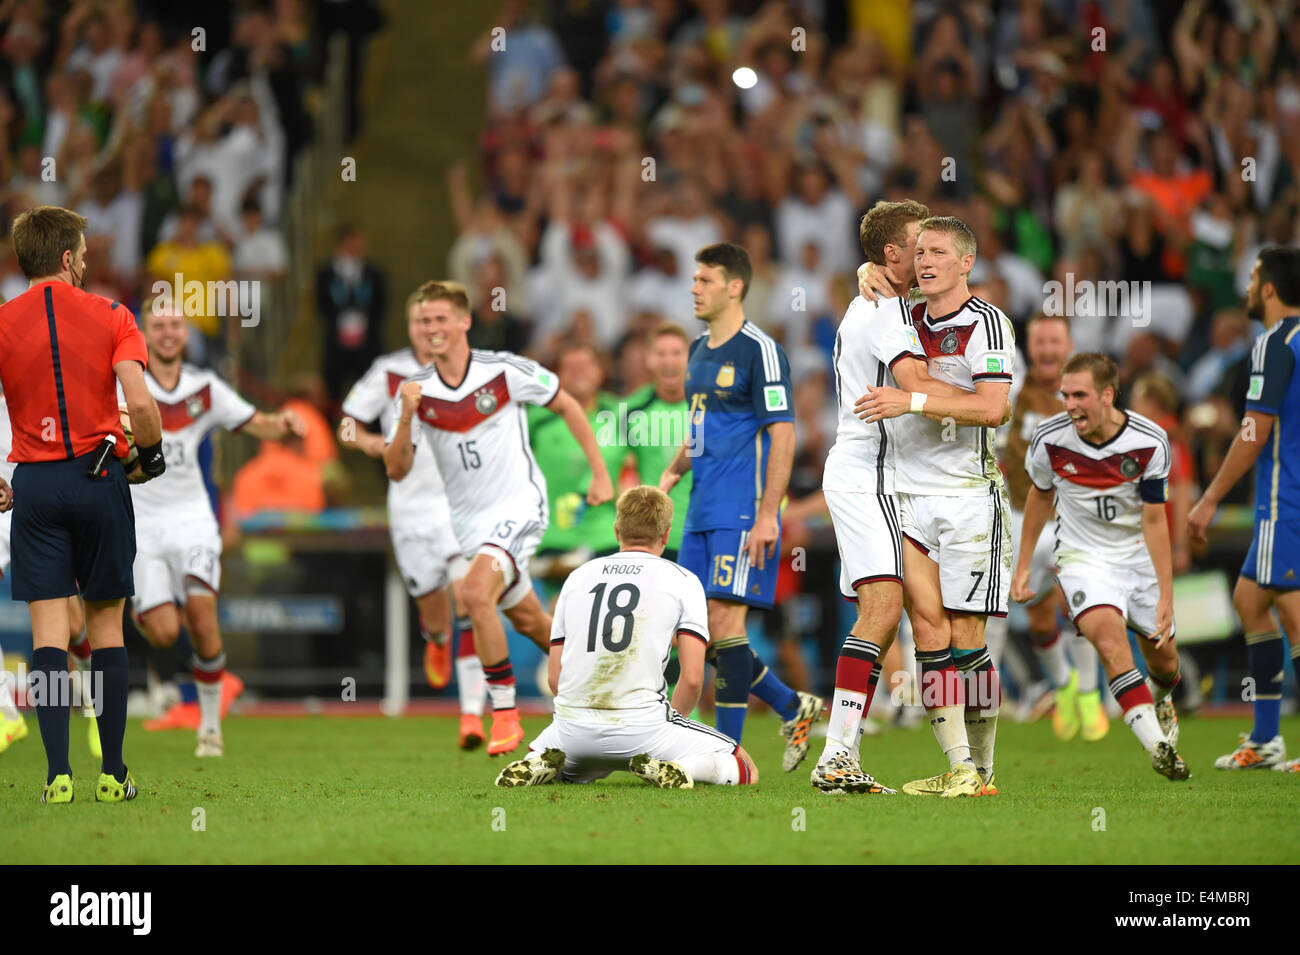 Rio De Janeiro, Brazil. 13th July, 2014. Germany team group (GER) Football/Soccer : Toni Kroos of Germany kneels on the ground as Germany players celebrate after winning the FIFA World Cup Brazil 2014 Final match between Germany 1-0 Argentina at Estadio do Maracana in Rio De Janeiro, Brazil . © FAR EAST PRESS/AFLO/Alamy Live News Stock Photo